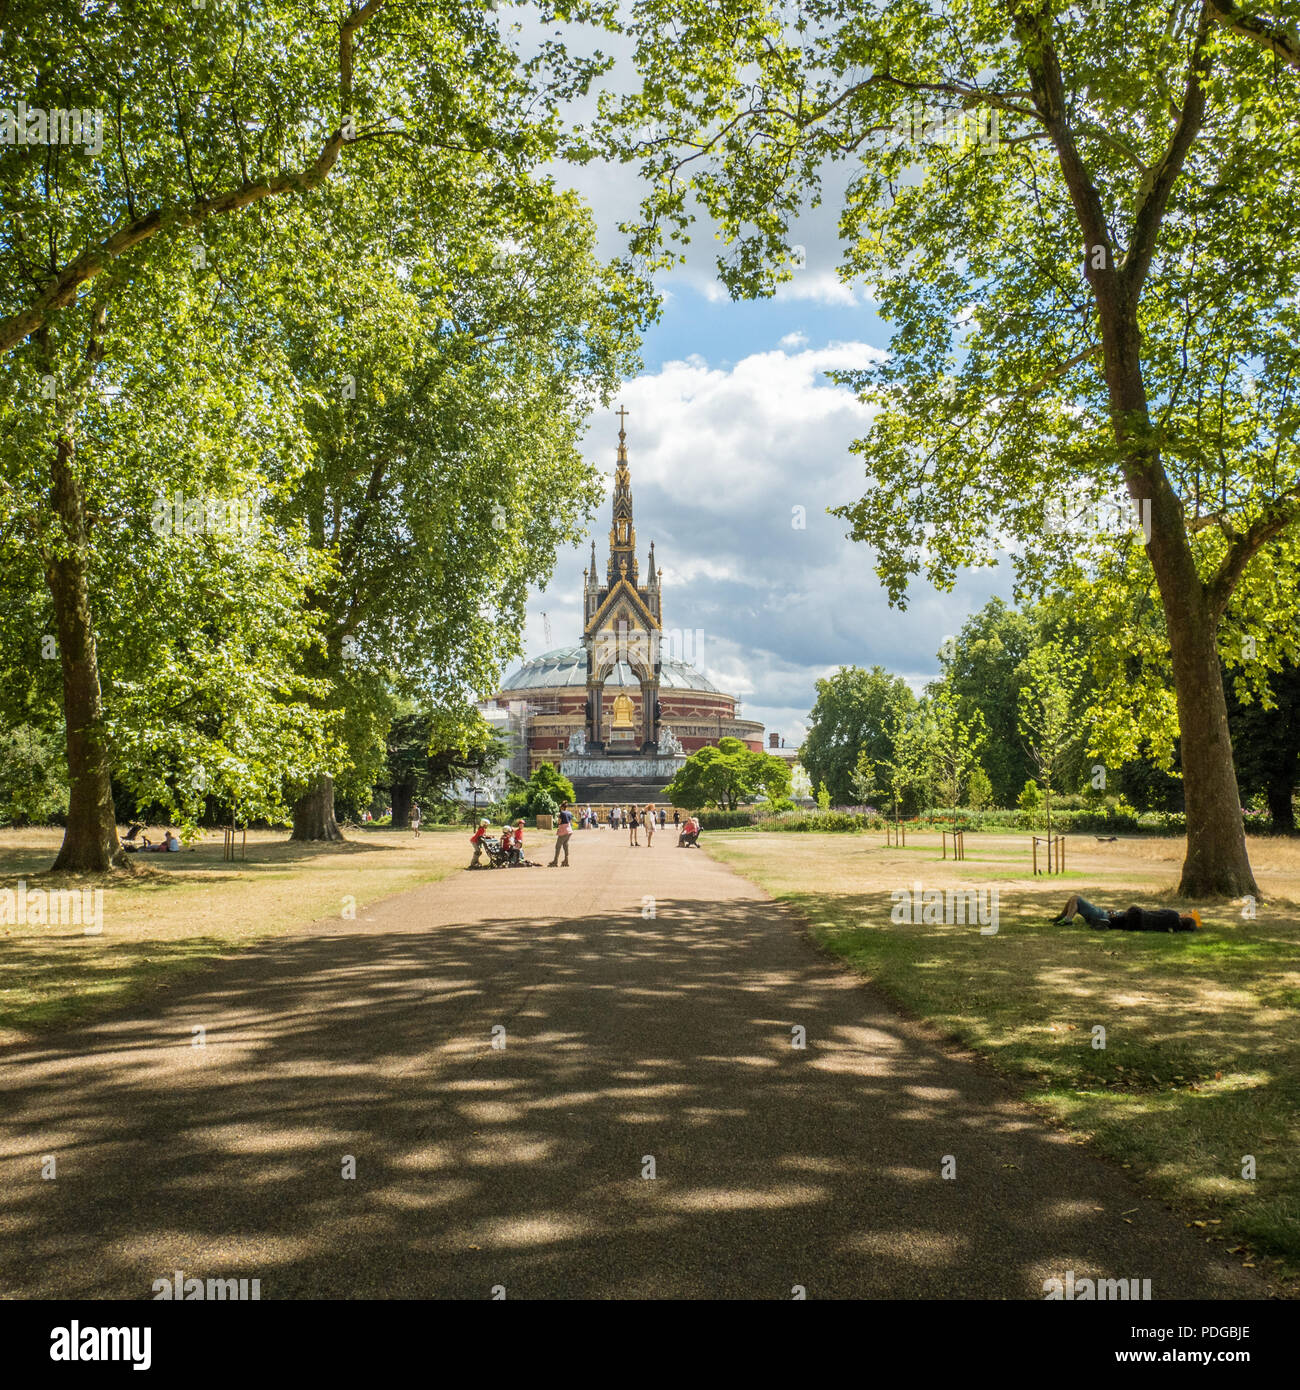 The Gothic Revival Styled Albert Memorial in Kensington Gardens with the Royal Albert (Concert) Hall behind, South Kensington, London, England. Stock Photo